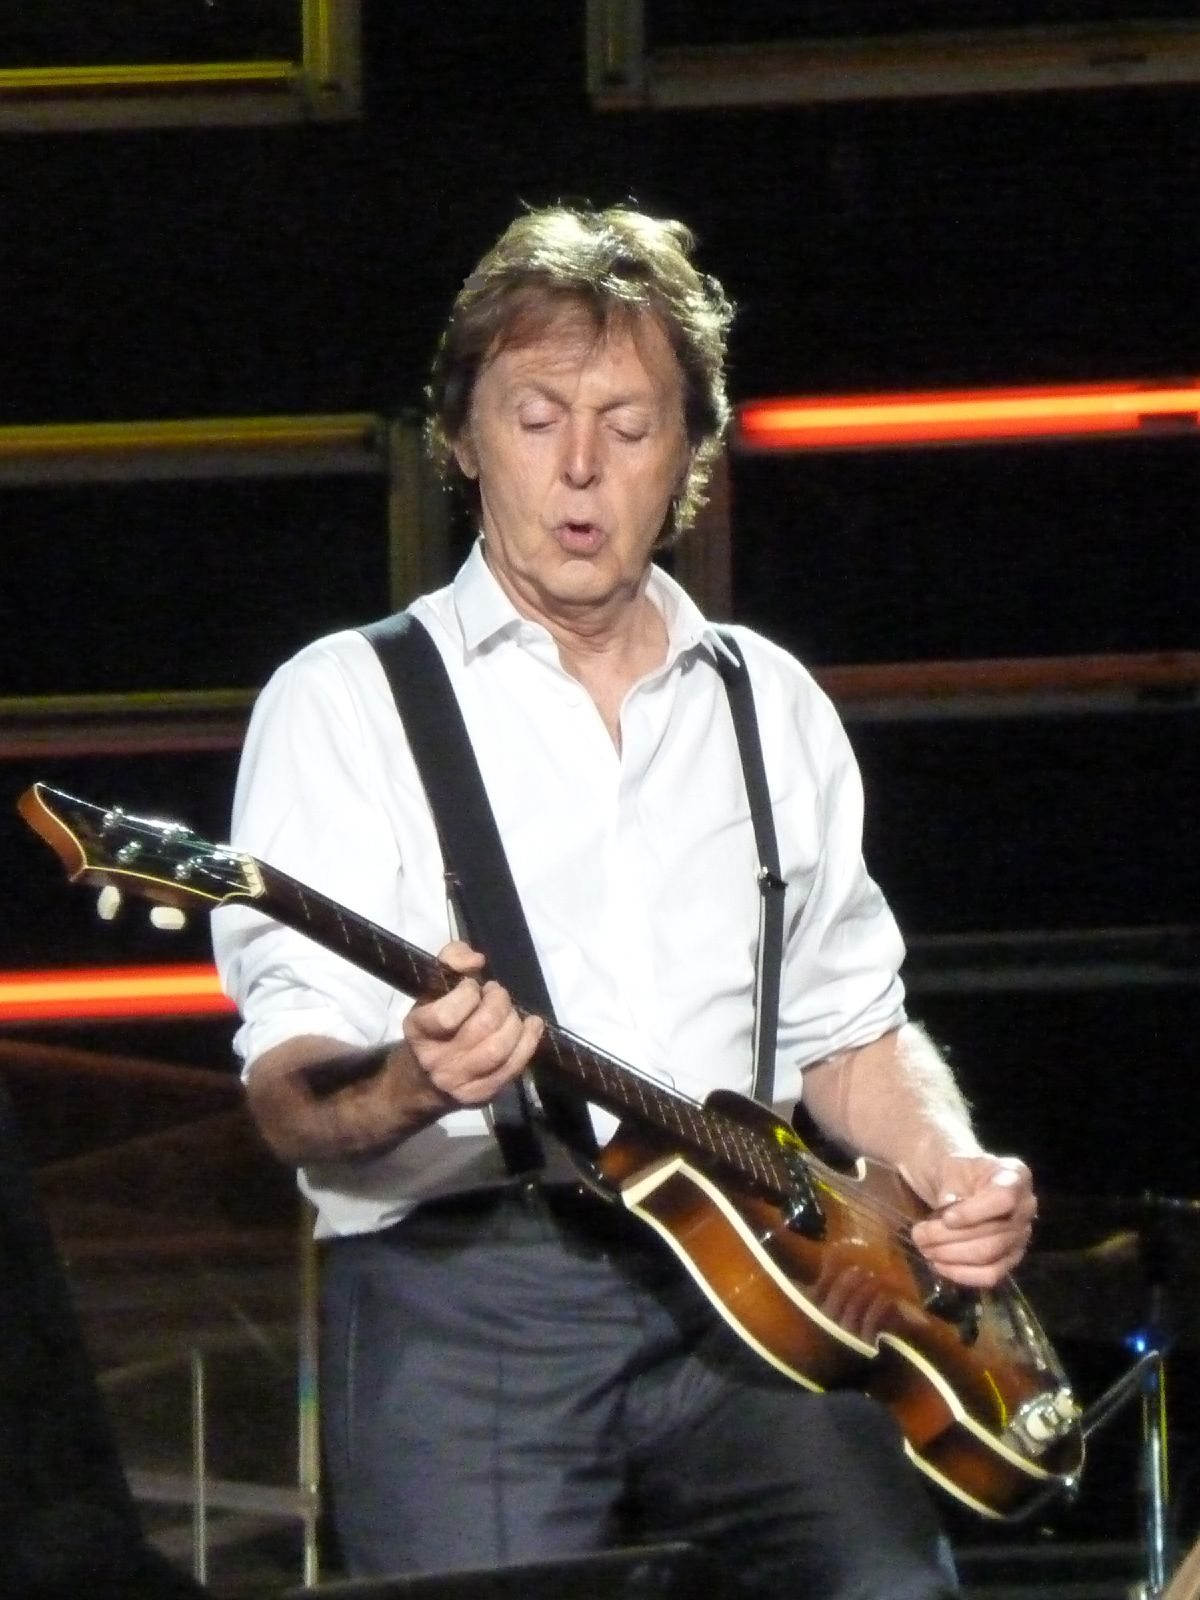 Sir Paul McCartney asks Russian President Putin for release of the